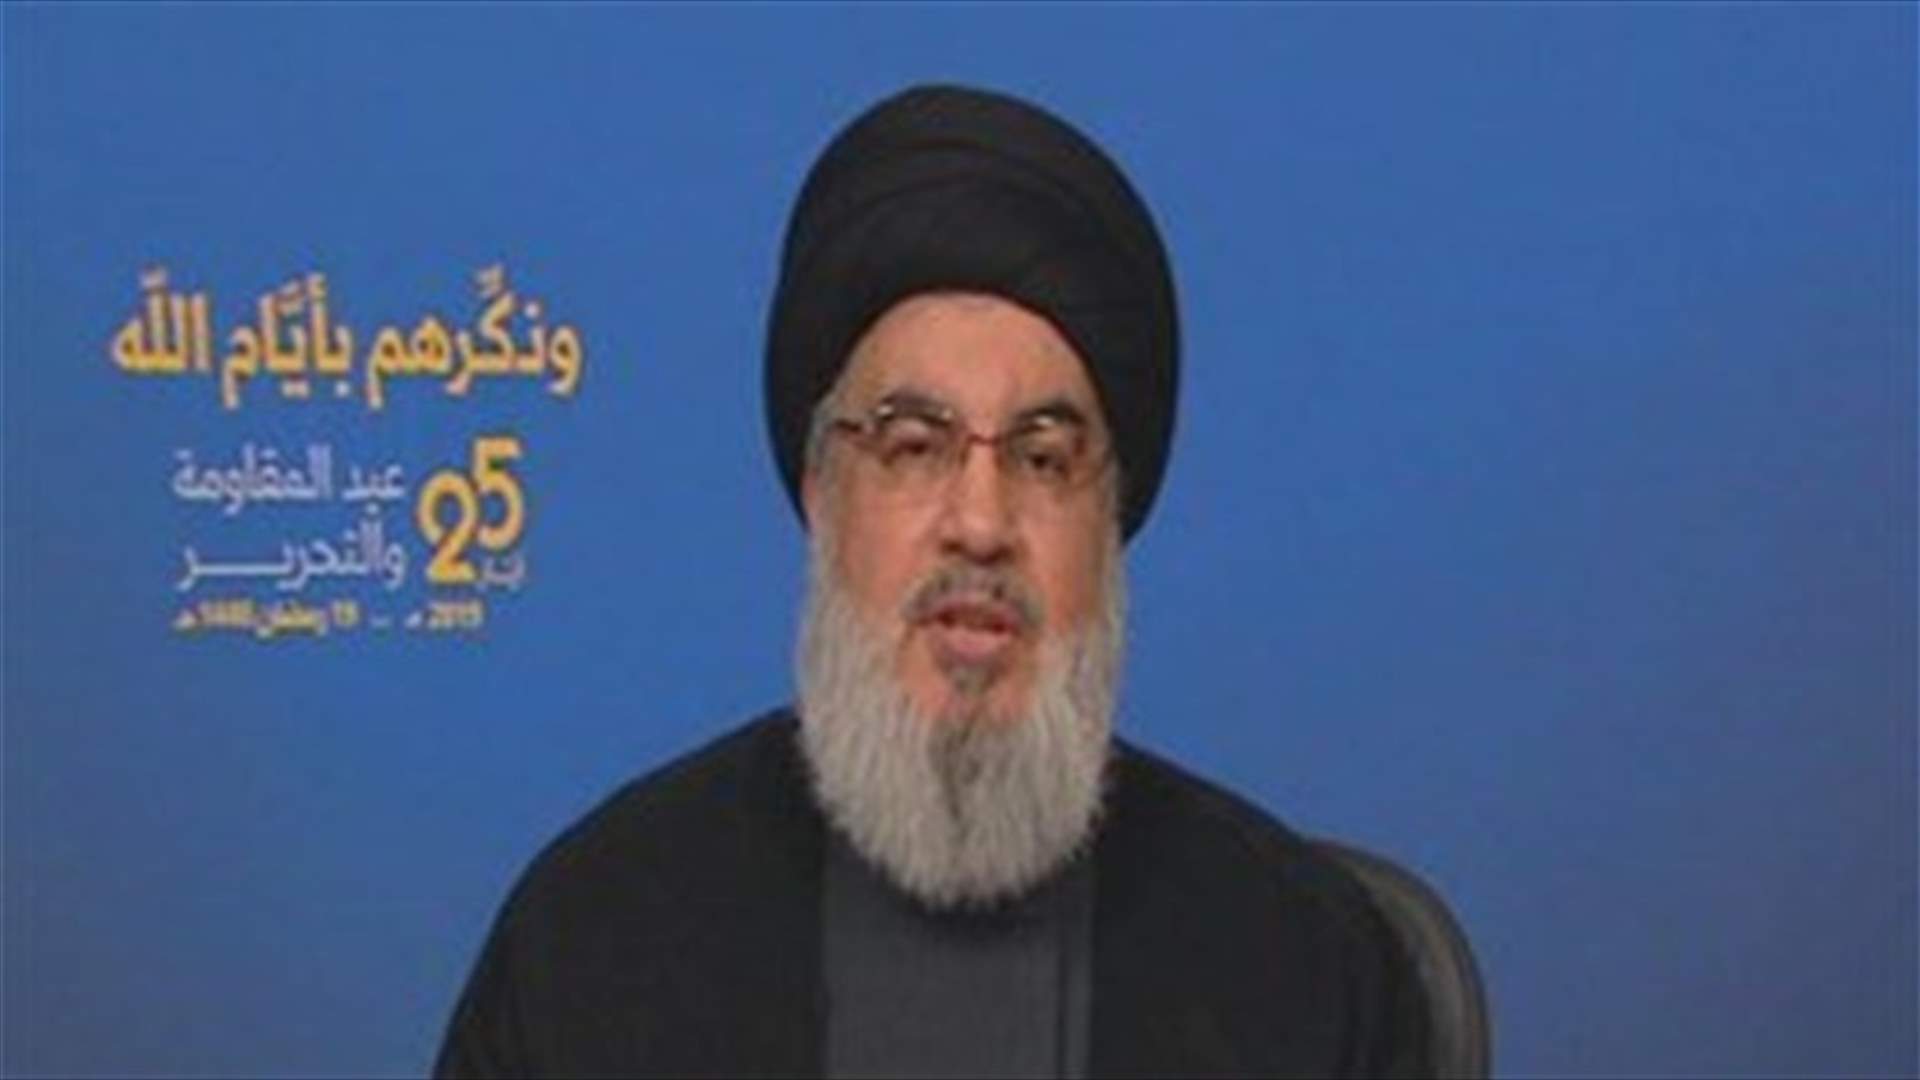 Nasrallah: Lebanon can face attempts to prevent it from accessing oil and gas resources